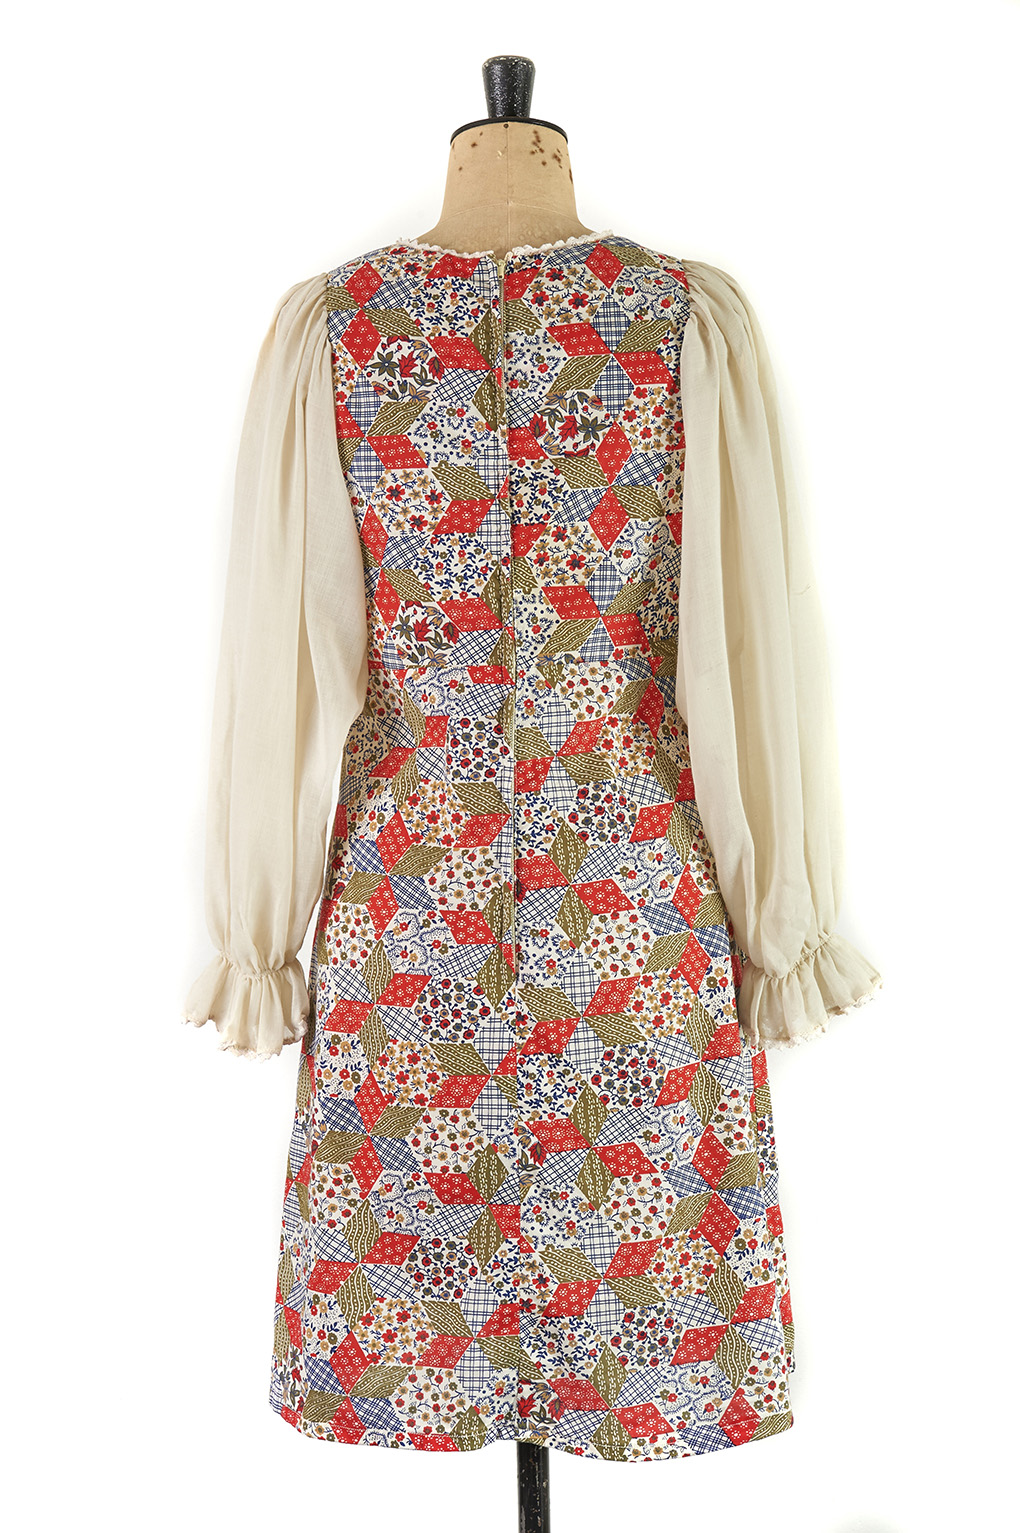 Peasant Dress by Alexander Clare c.1960